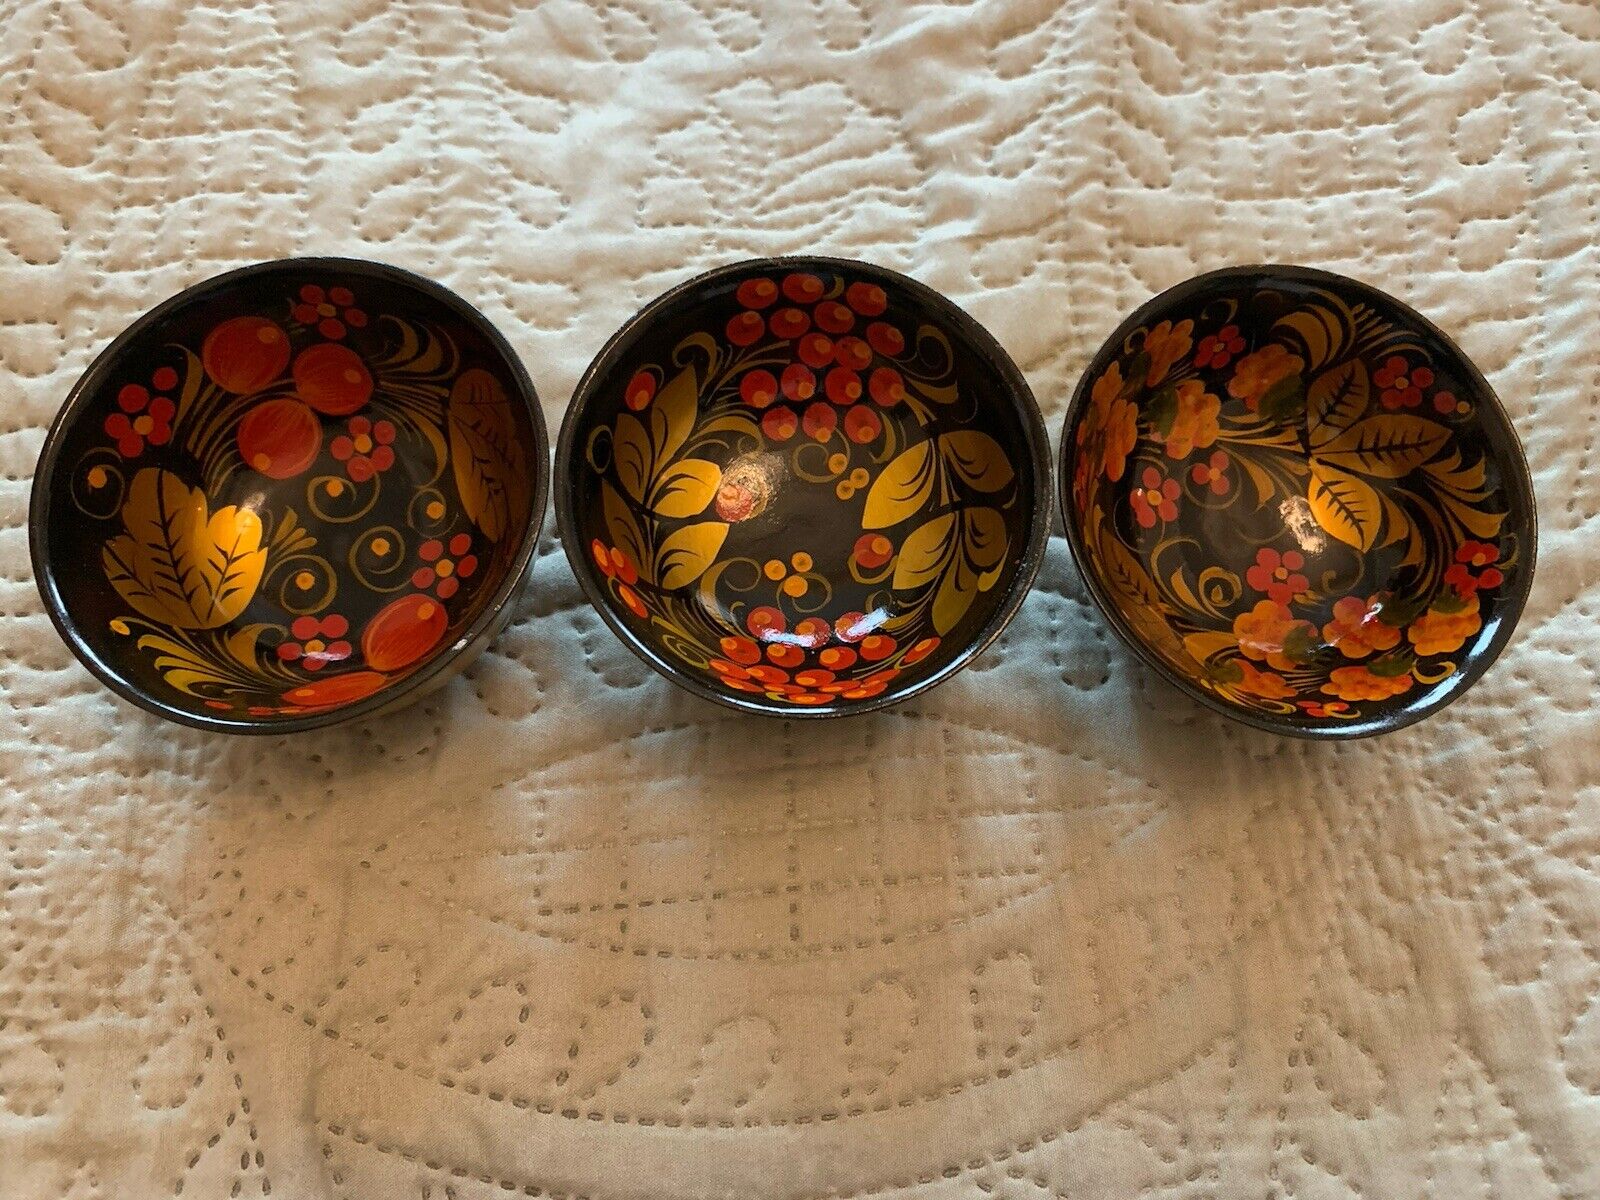 Russian/USSR Set Of 3 Wooden Hand Painted Trinket Dishes - Vintage Lacquer Ware